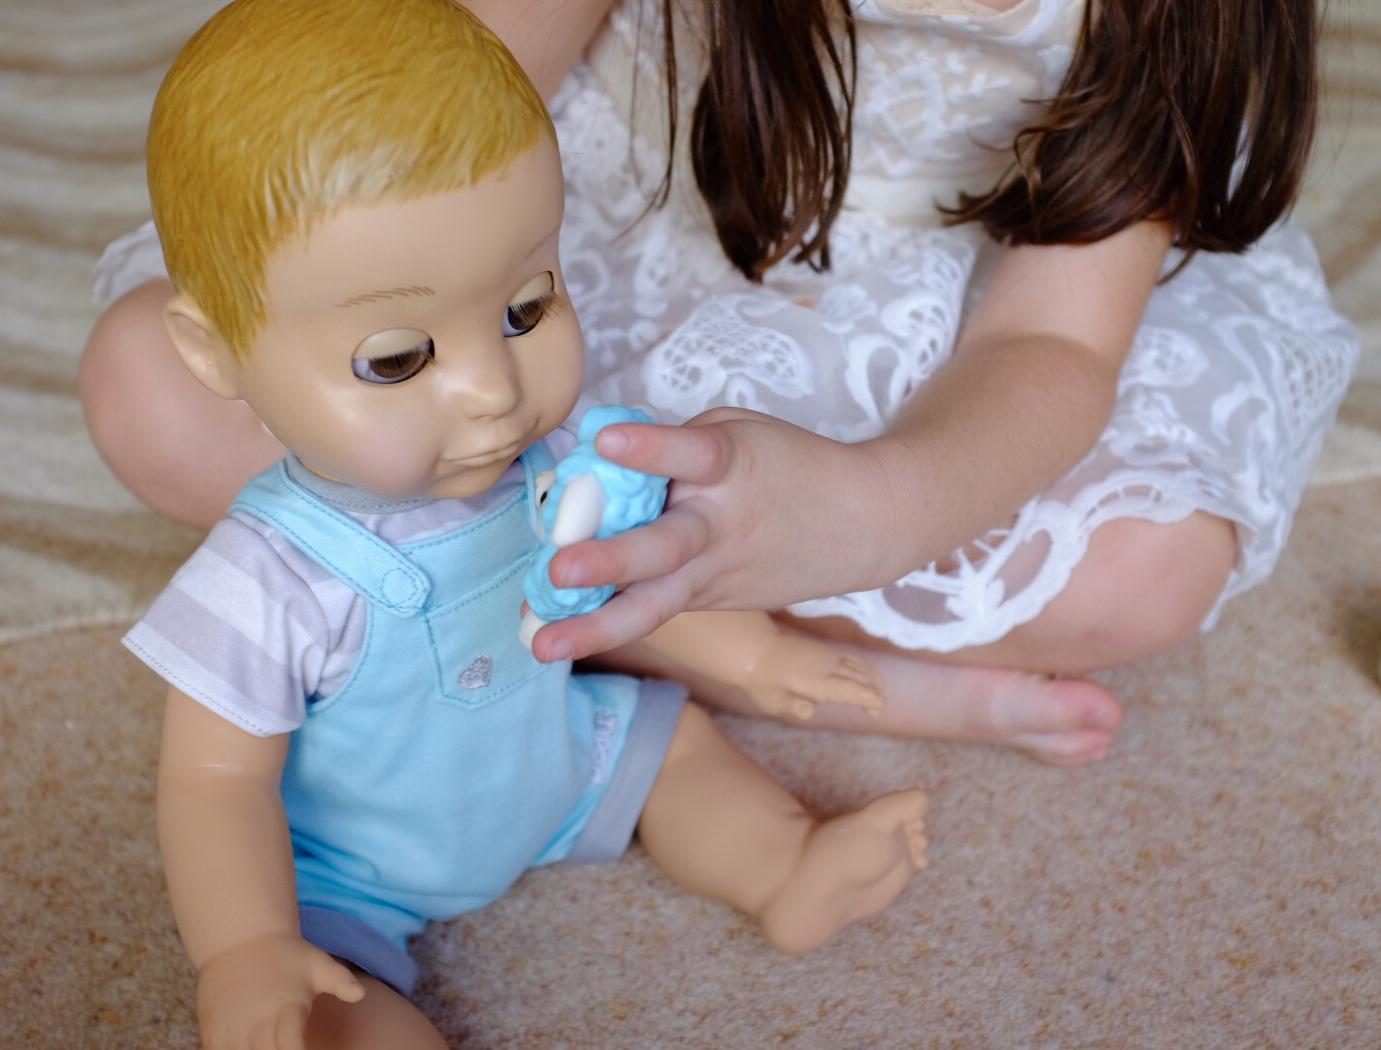 Girl playing with Lamby and Luvabeau doll